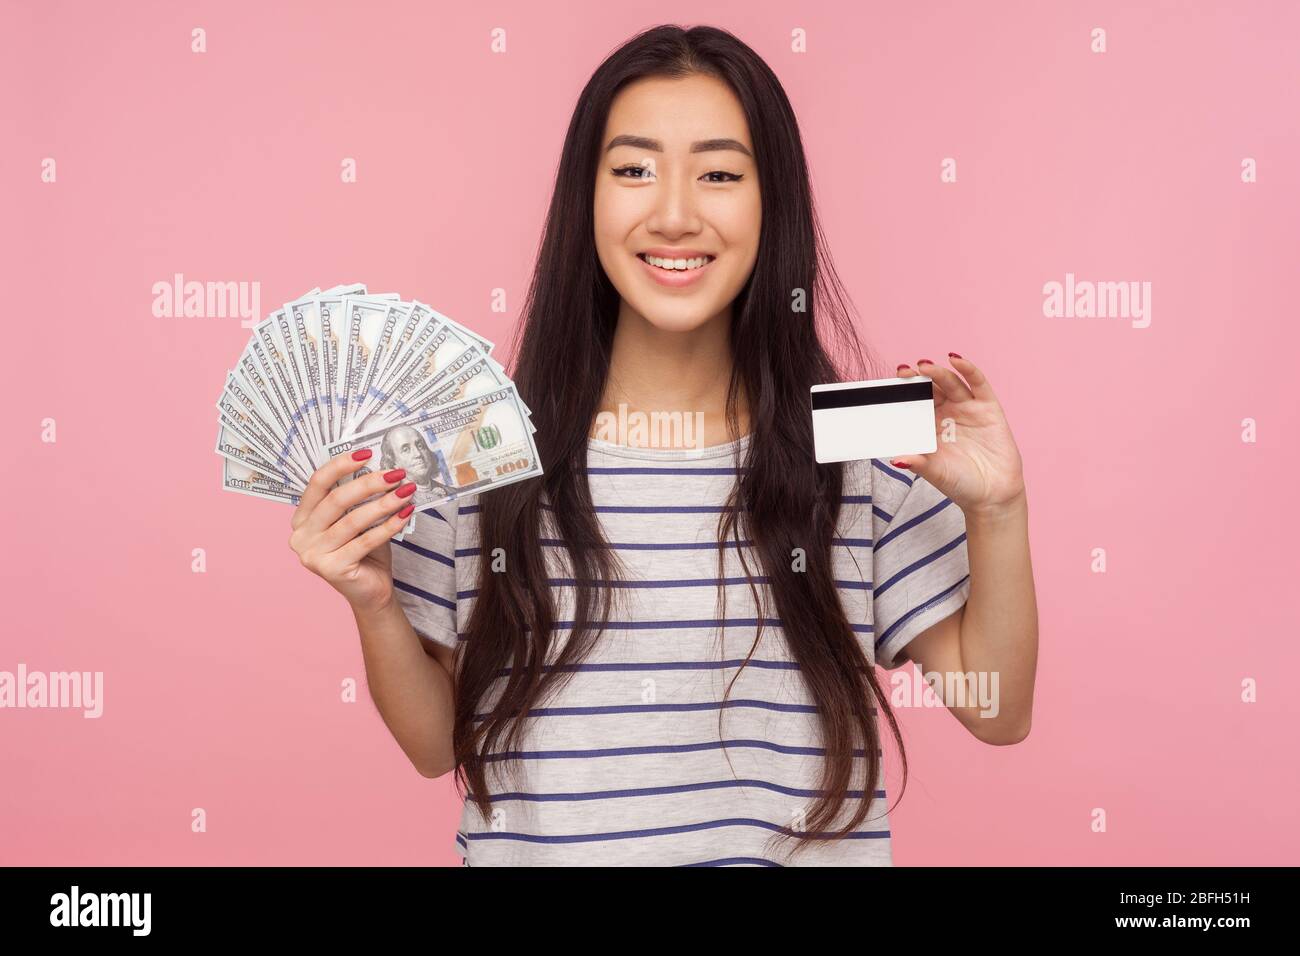 Cash deposits. Portrait of satisfied bank customer, happy brunette girl holding dollars banknotes, credit card and looking at camera with toothy smile Stock Photo